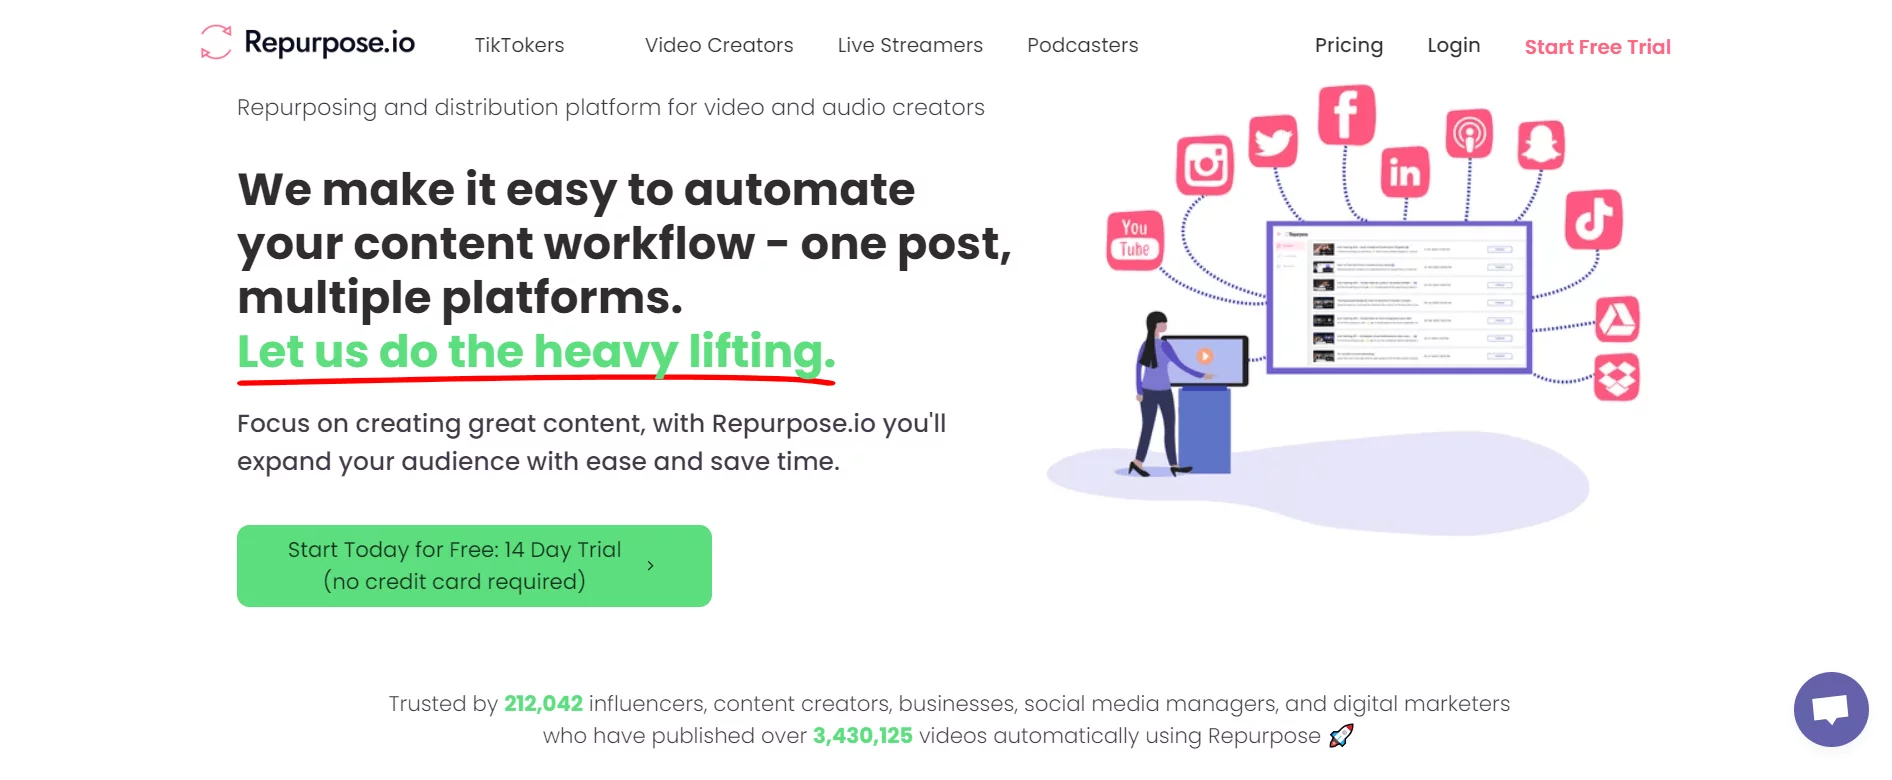 Repurpose.io webpage highlighting their service to automate content workflow across multiple platforms with a free trial offer.